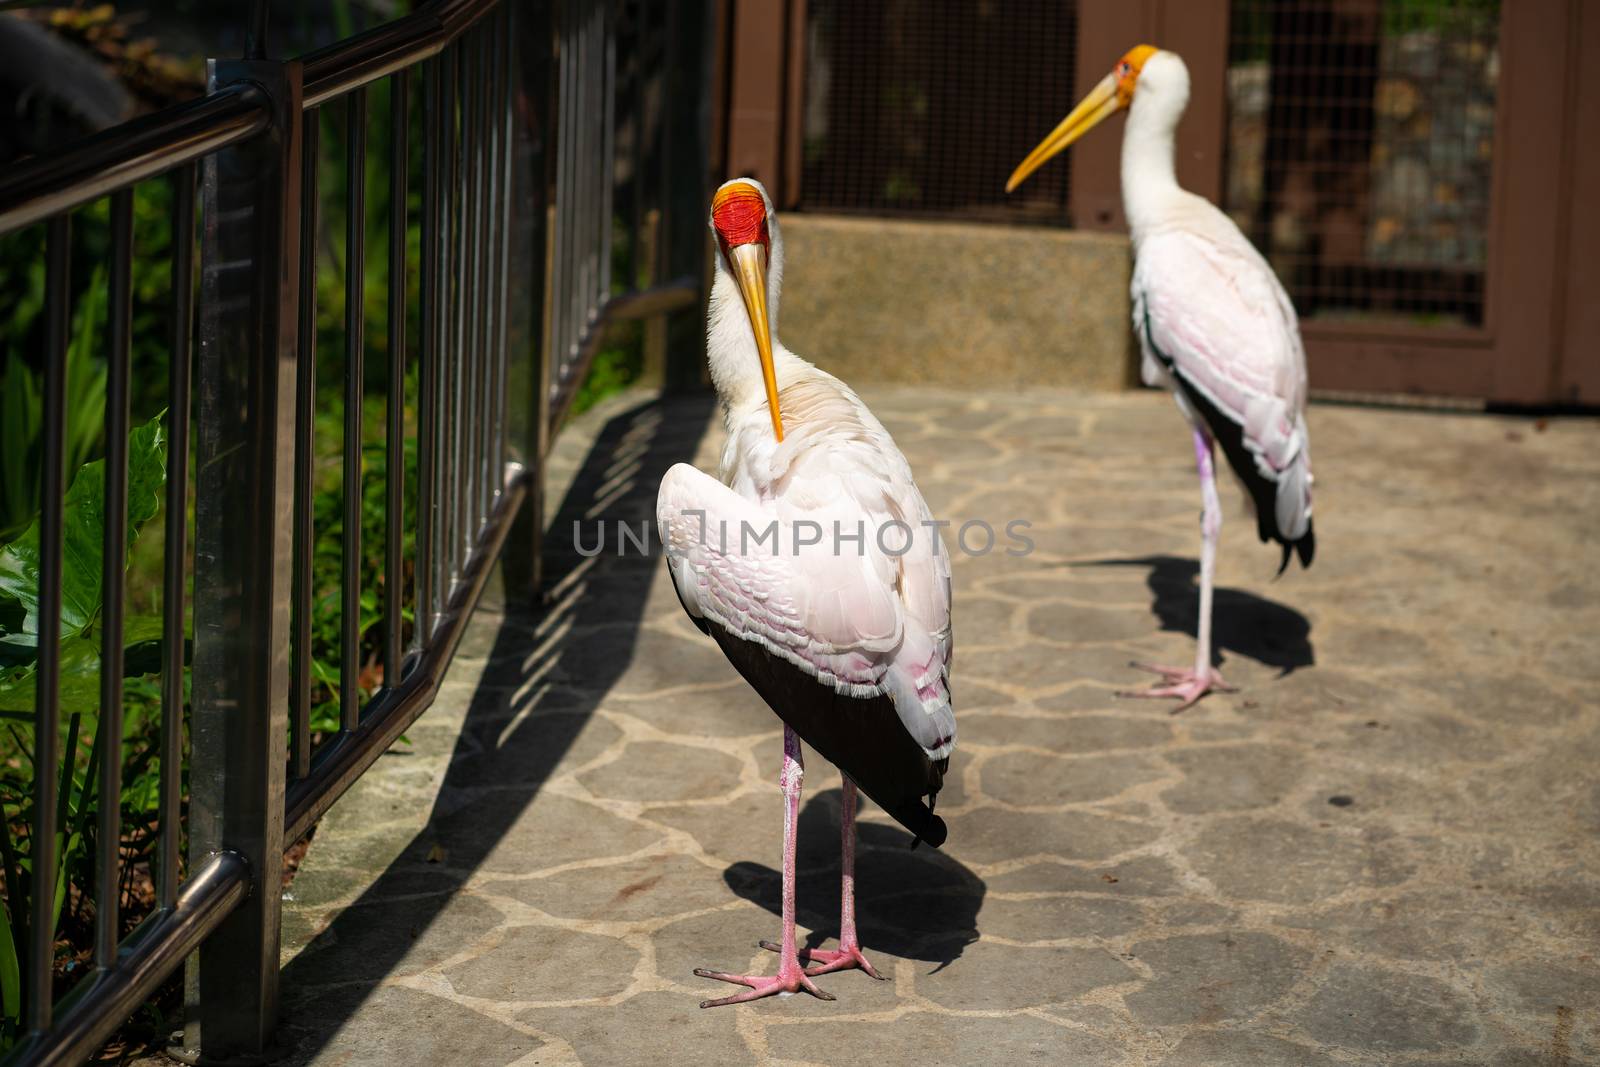 A pair of dairy storks walks along a path in a park.